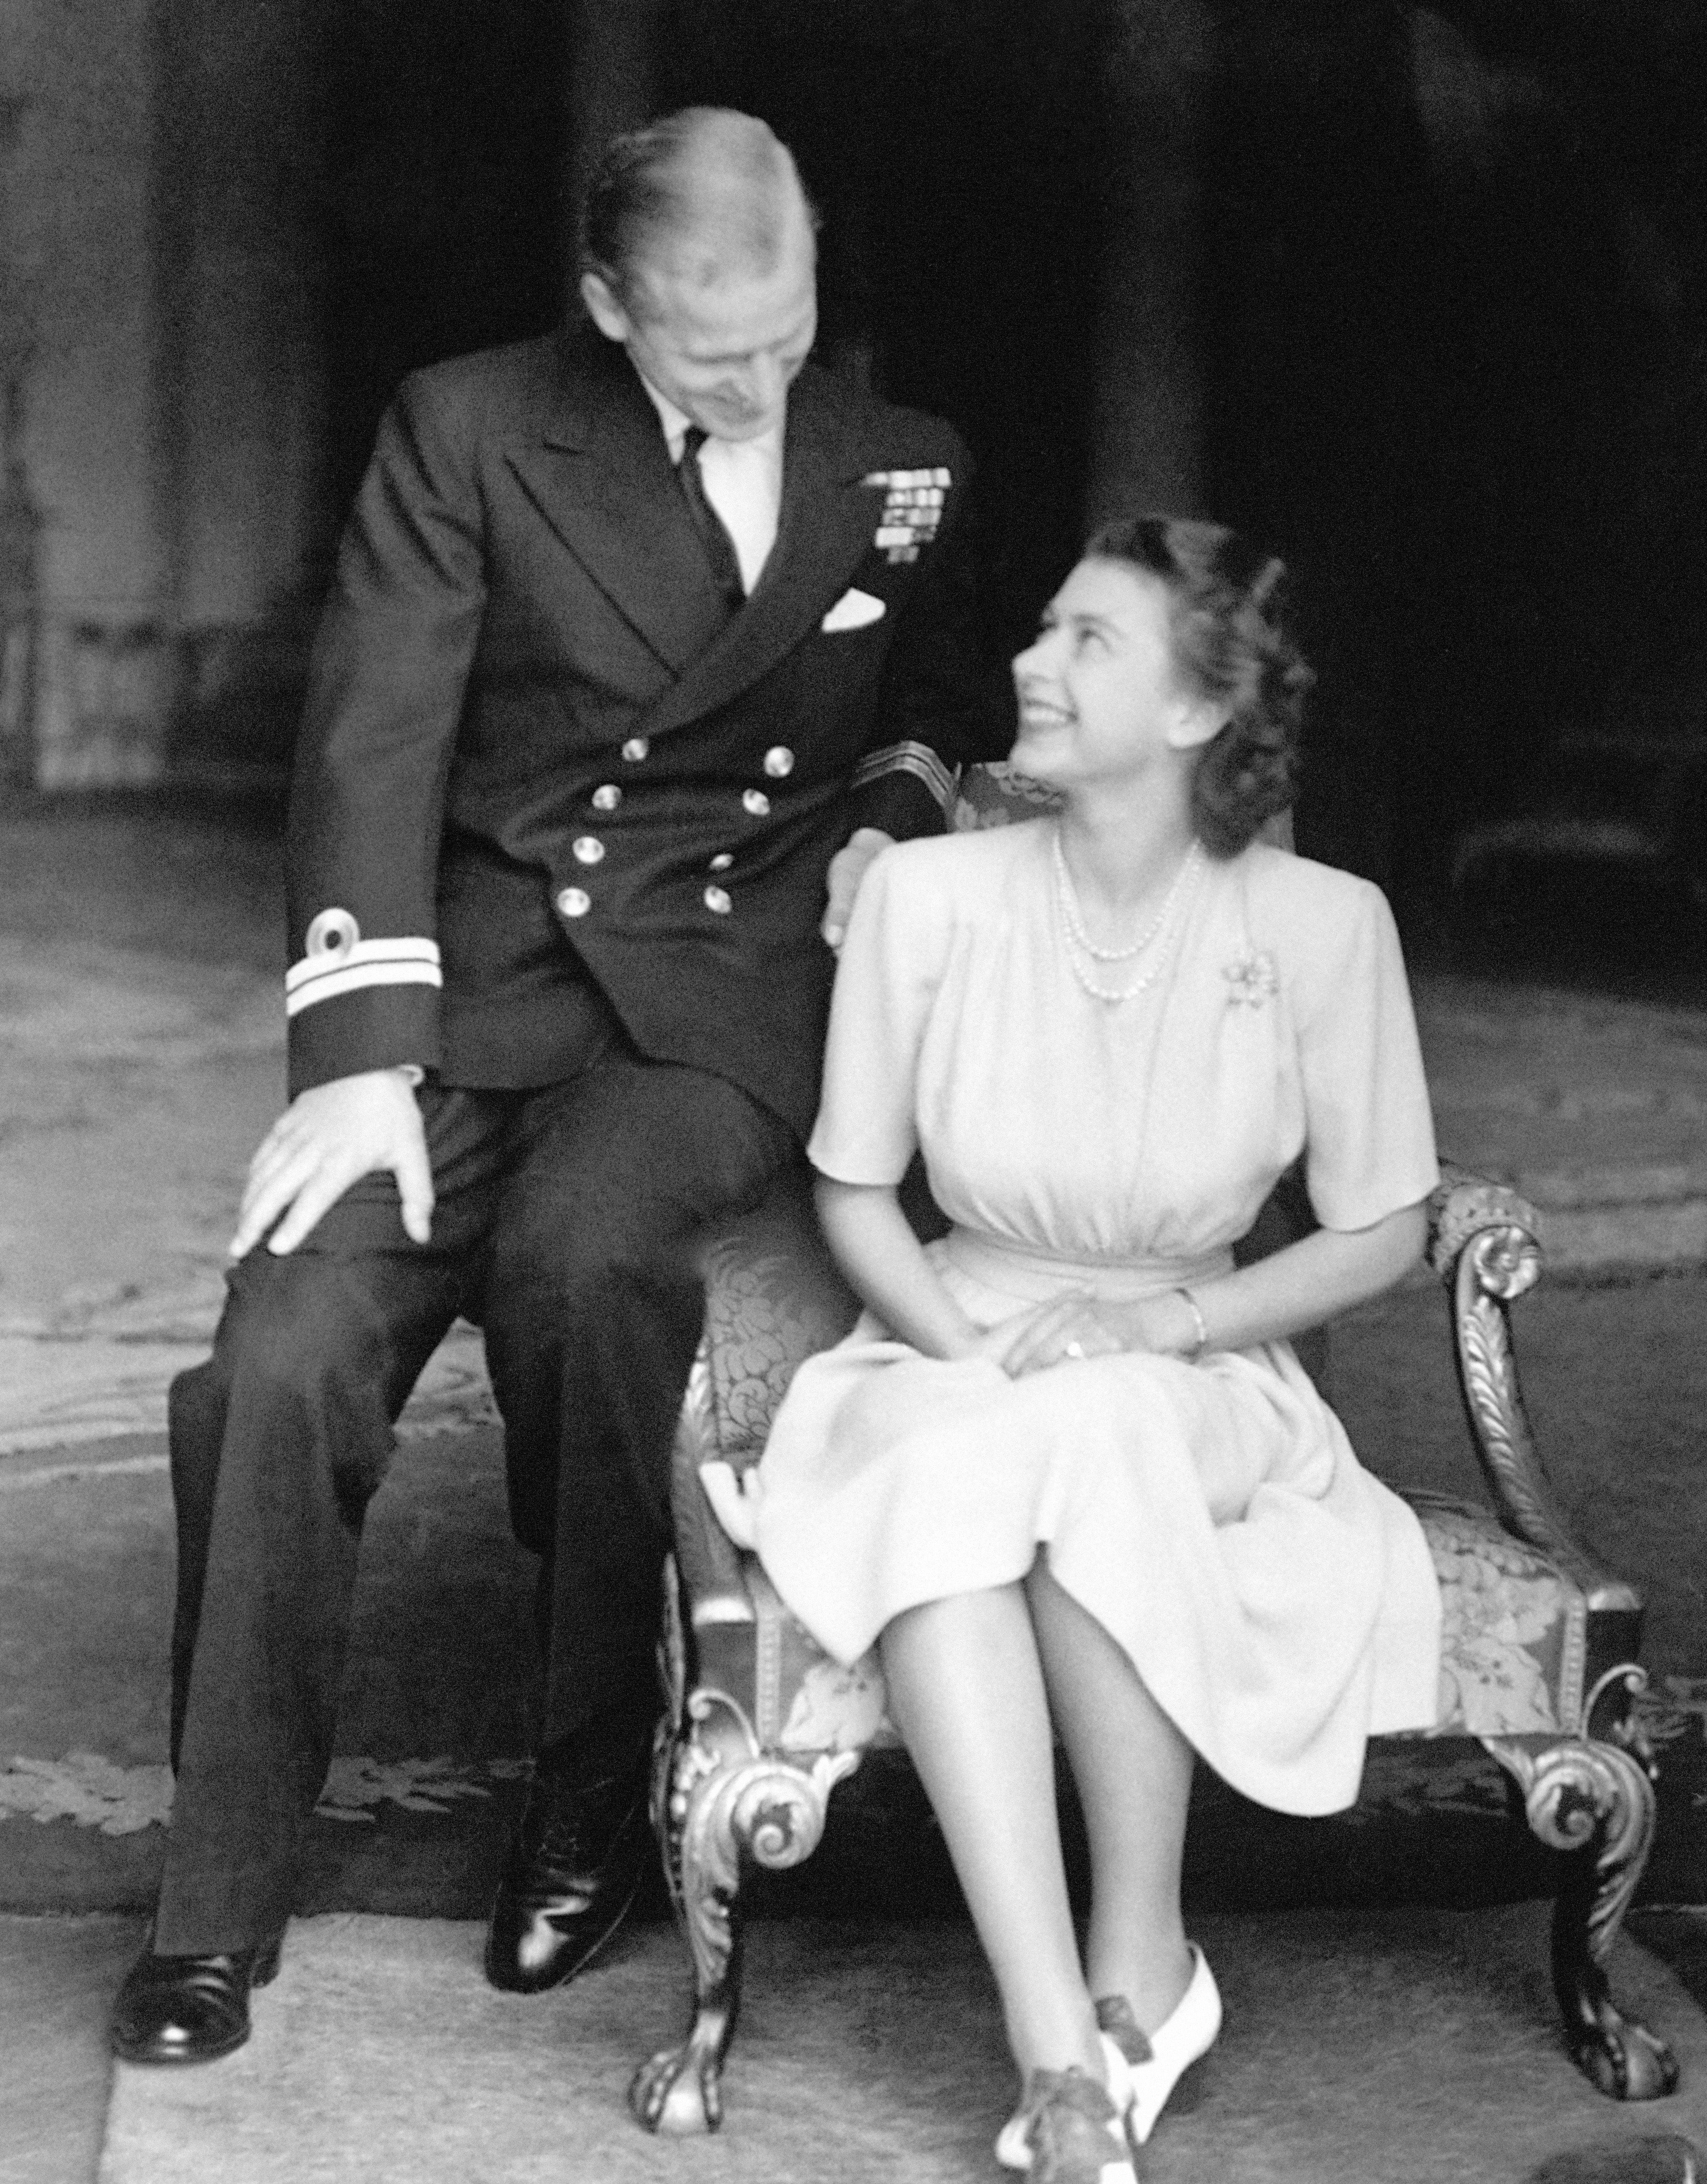 The engagement of Princess Elizabeth to Lieutenant Philip Mountbatten is announced and the happy young couple are pictured together at Buckingham Palace